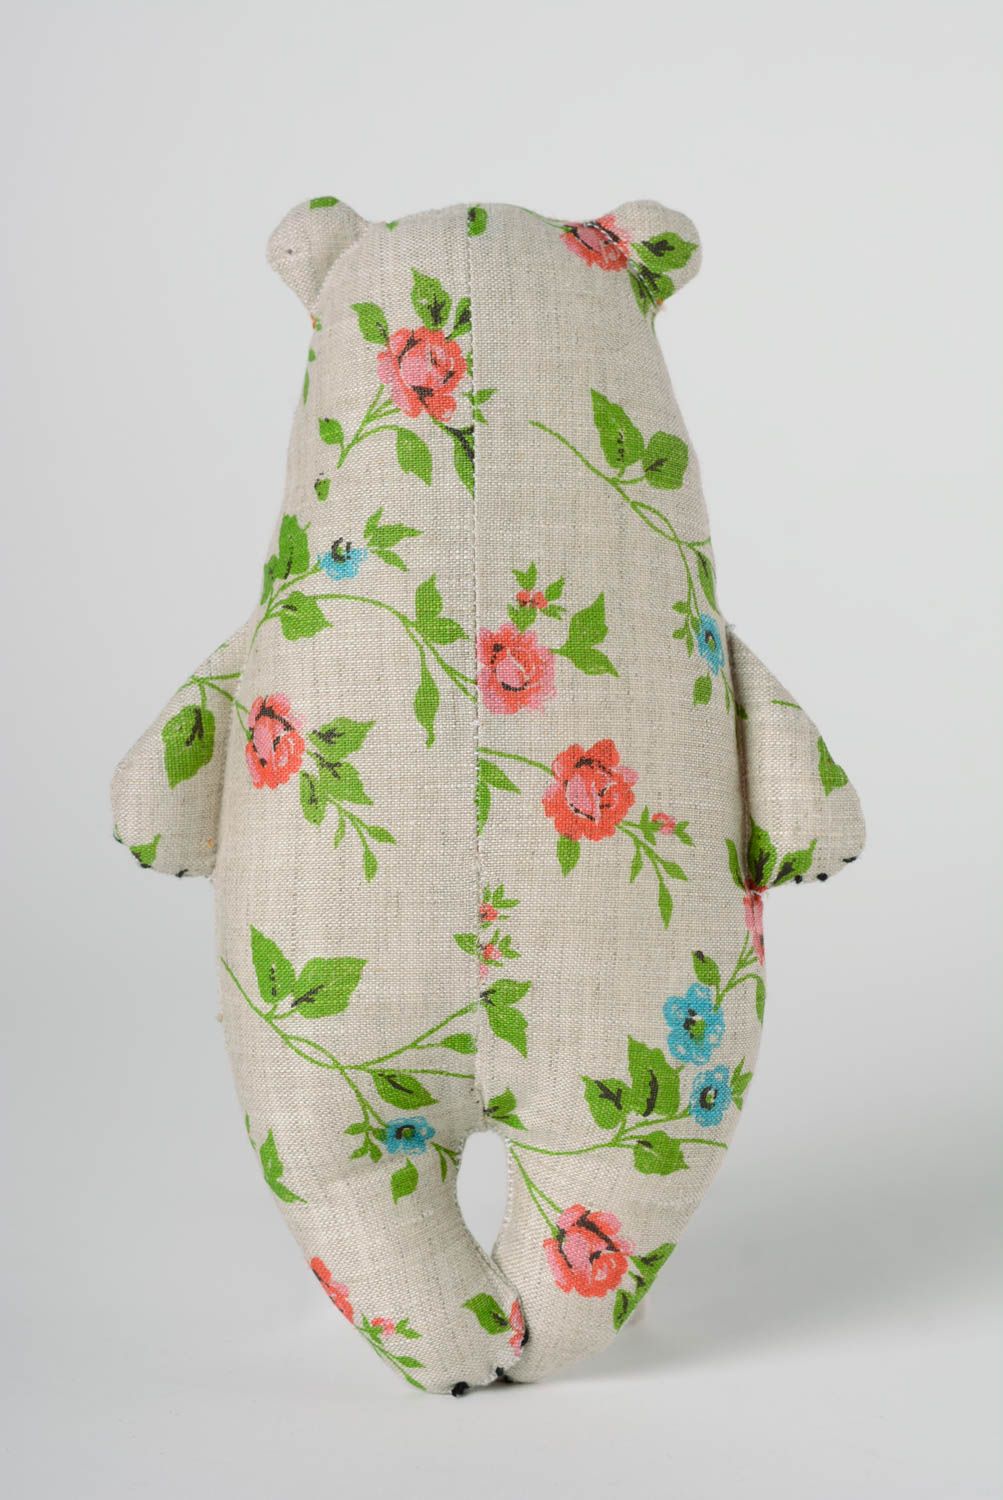 Handmade soft toy bear sewn of one colored and patterned linen with embroidery photo 4